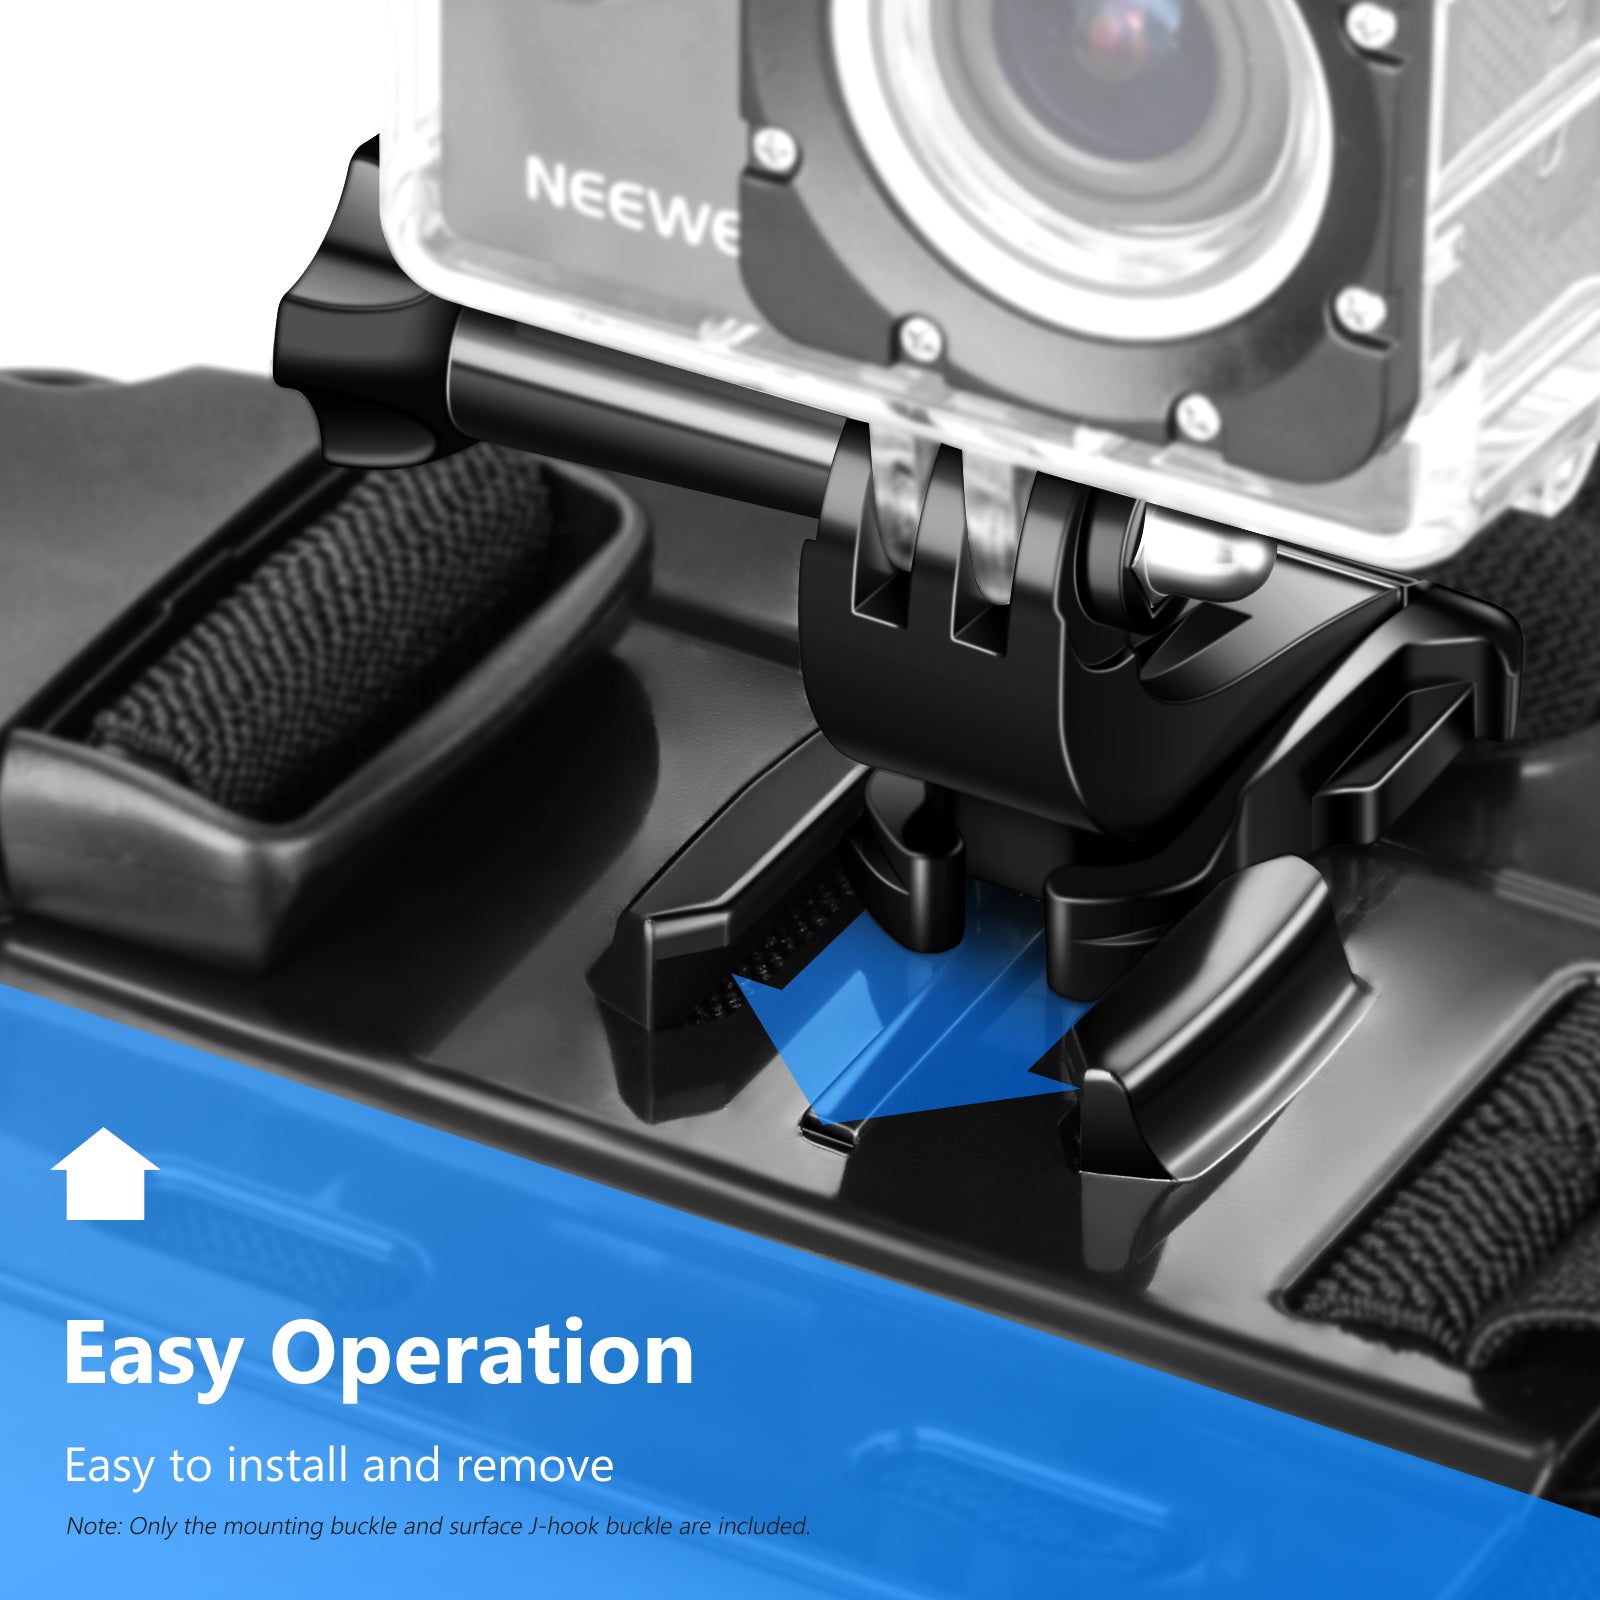 NEEWER 8-in-1 Accessory Kit For Action Cameras